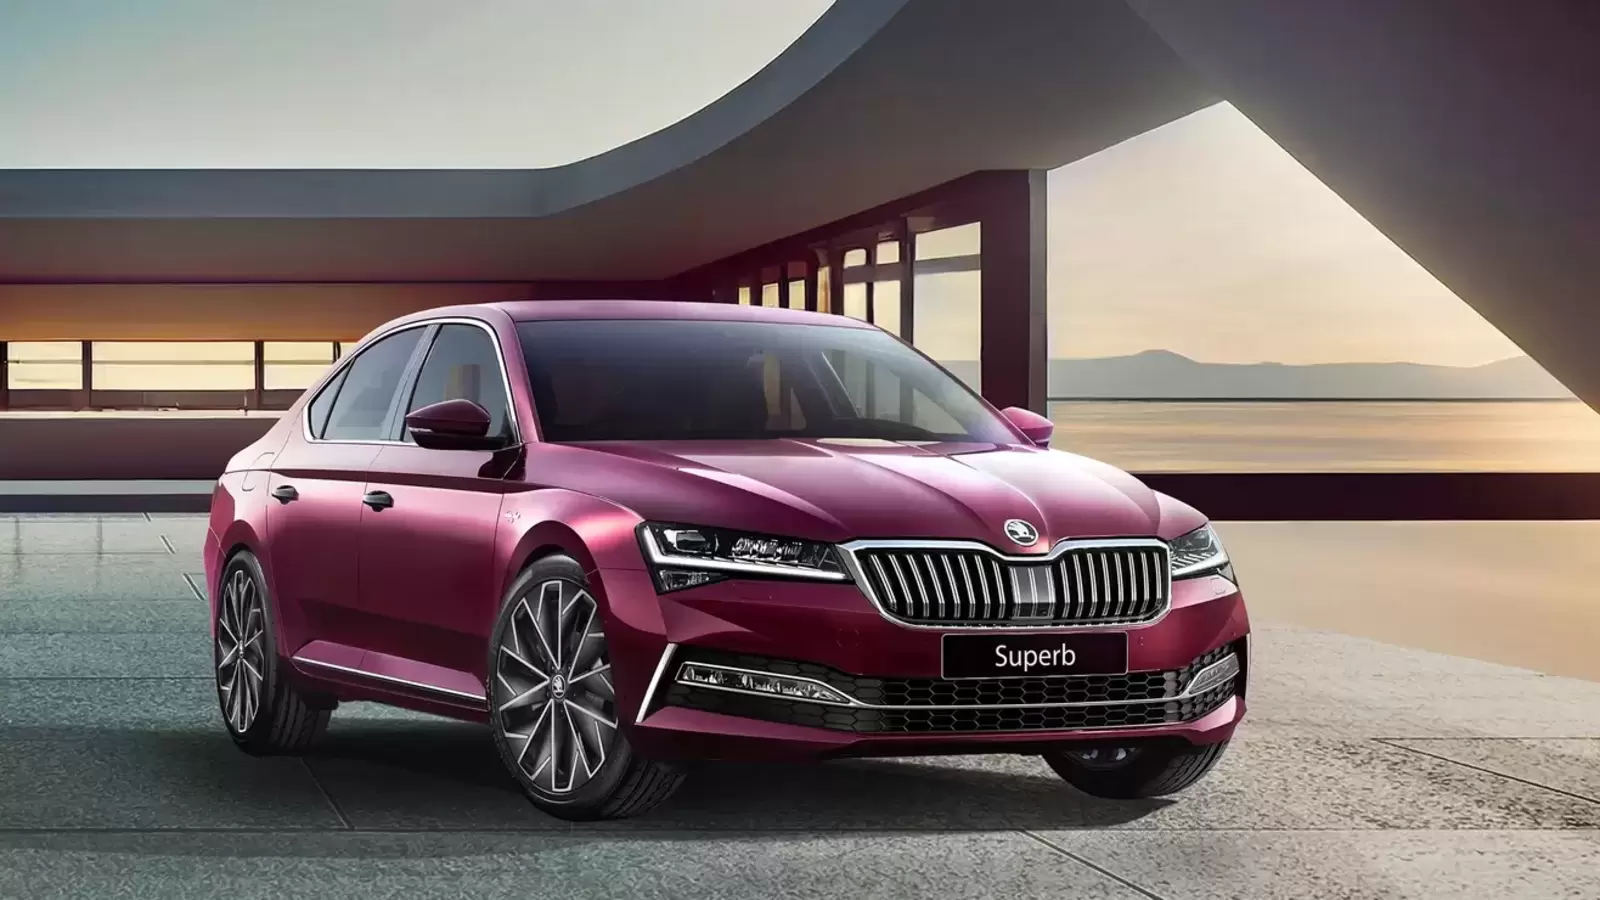 Skoda Superb returns to India with updated engine and new features. Check price